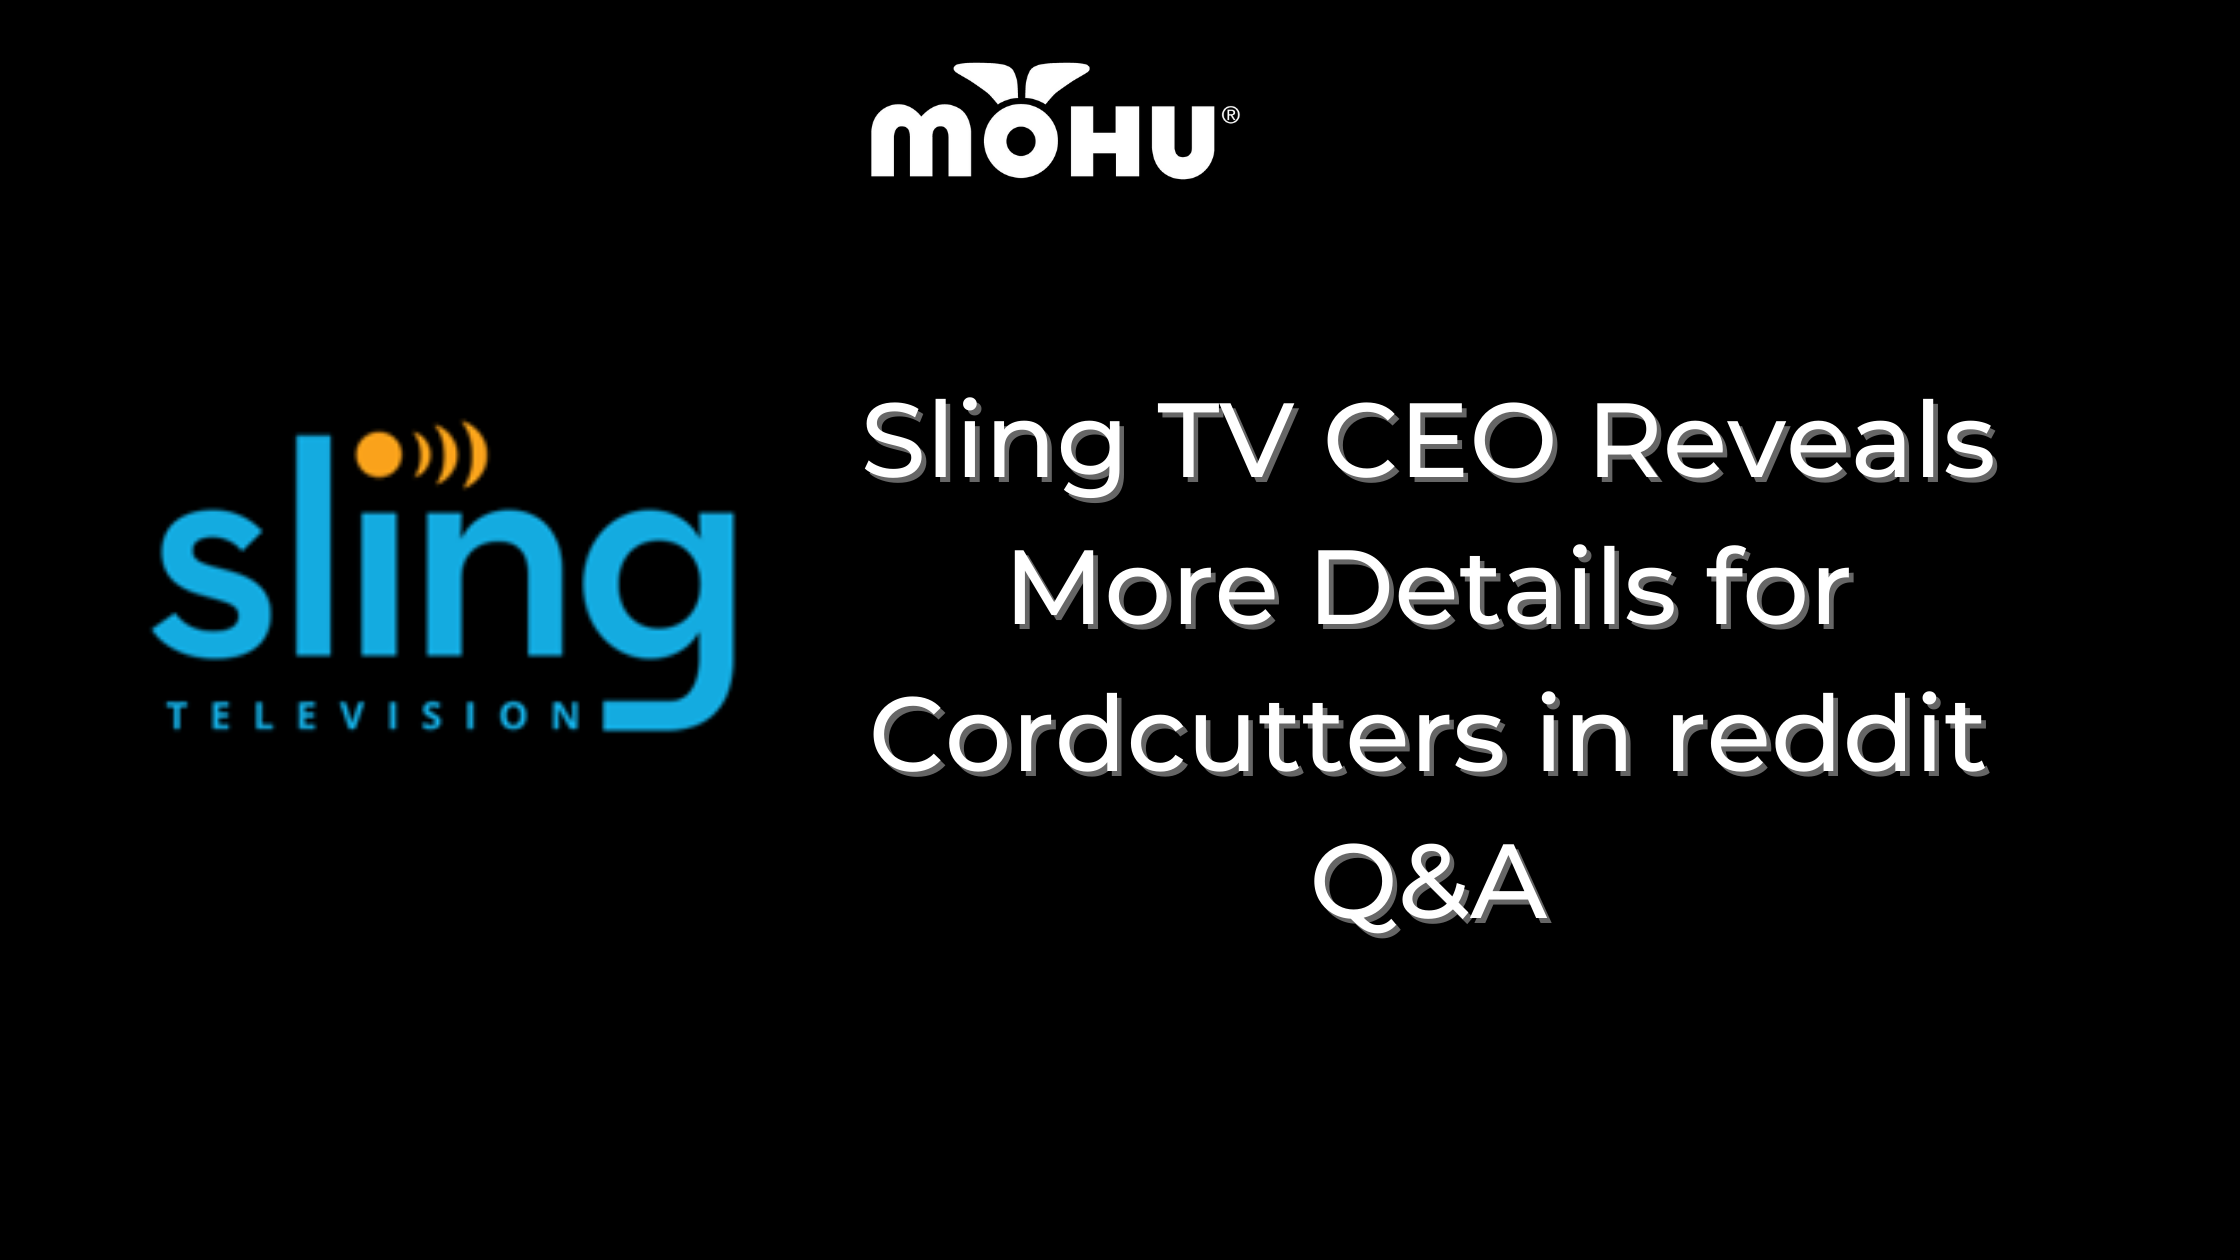 Sling TV CEO Reveals More Details for Cordcutters in reddit Q&A, Mohu and Sling Logo